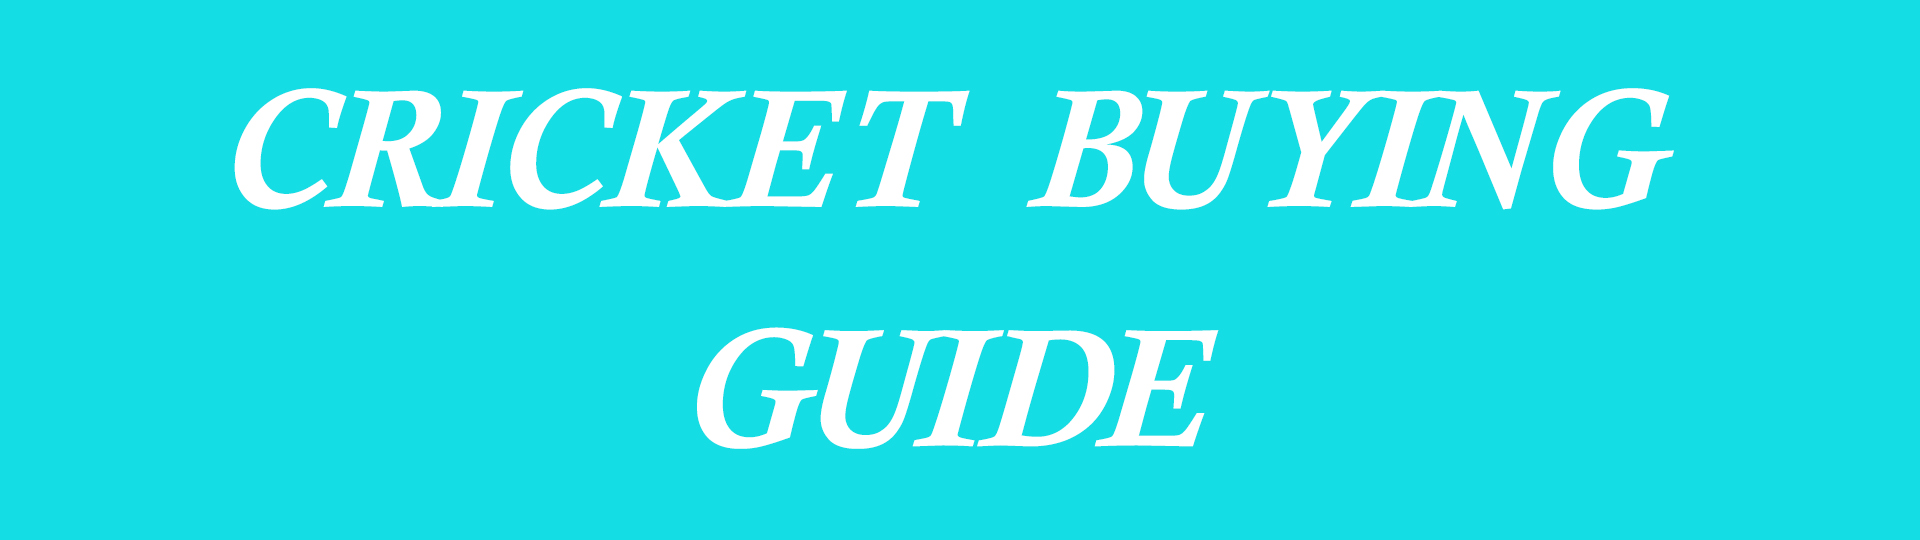 CRICKET BUYING GUIDE